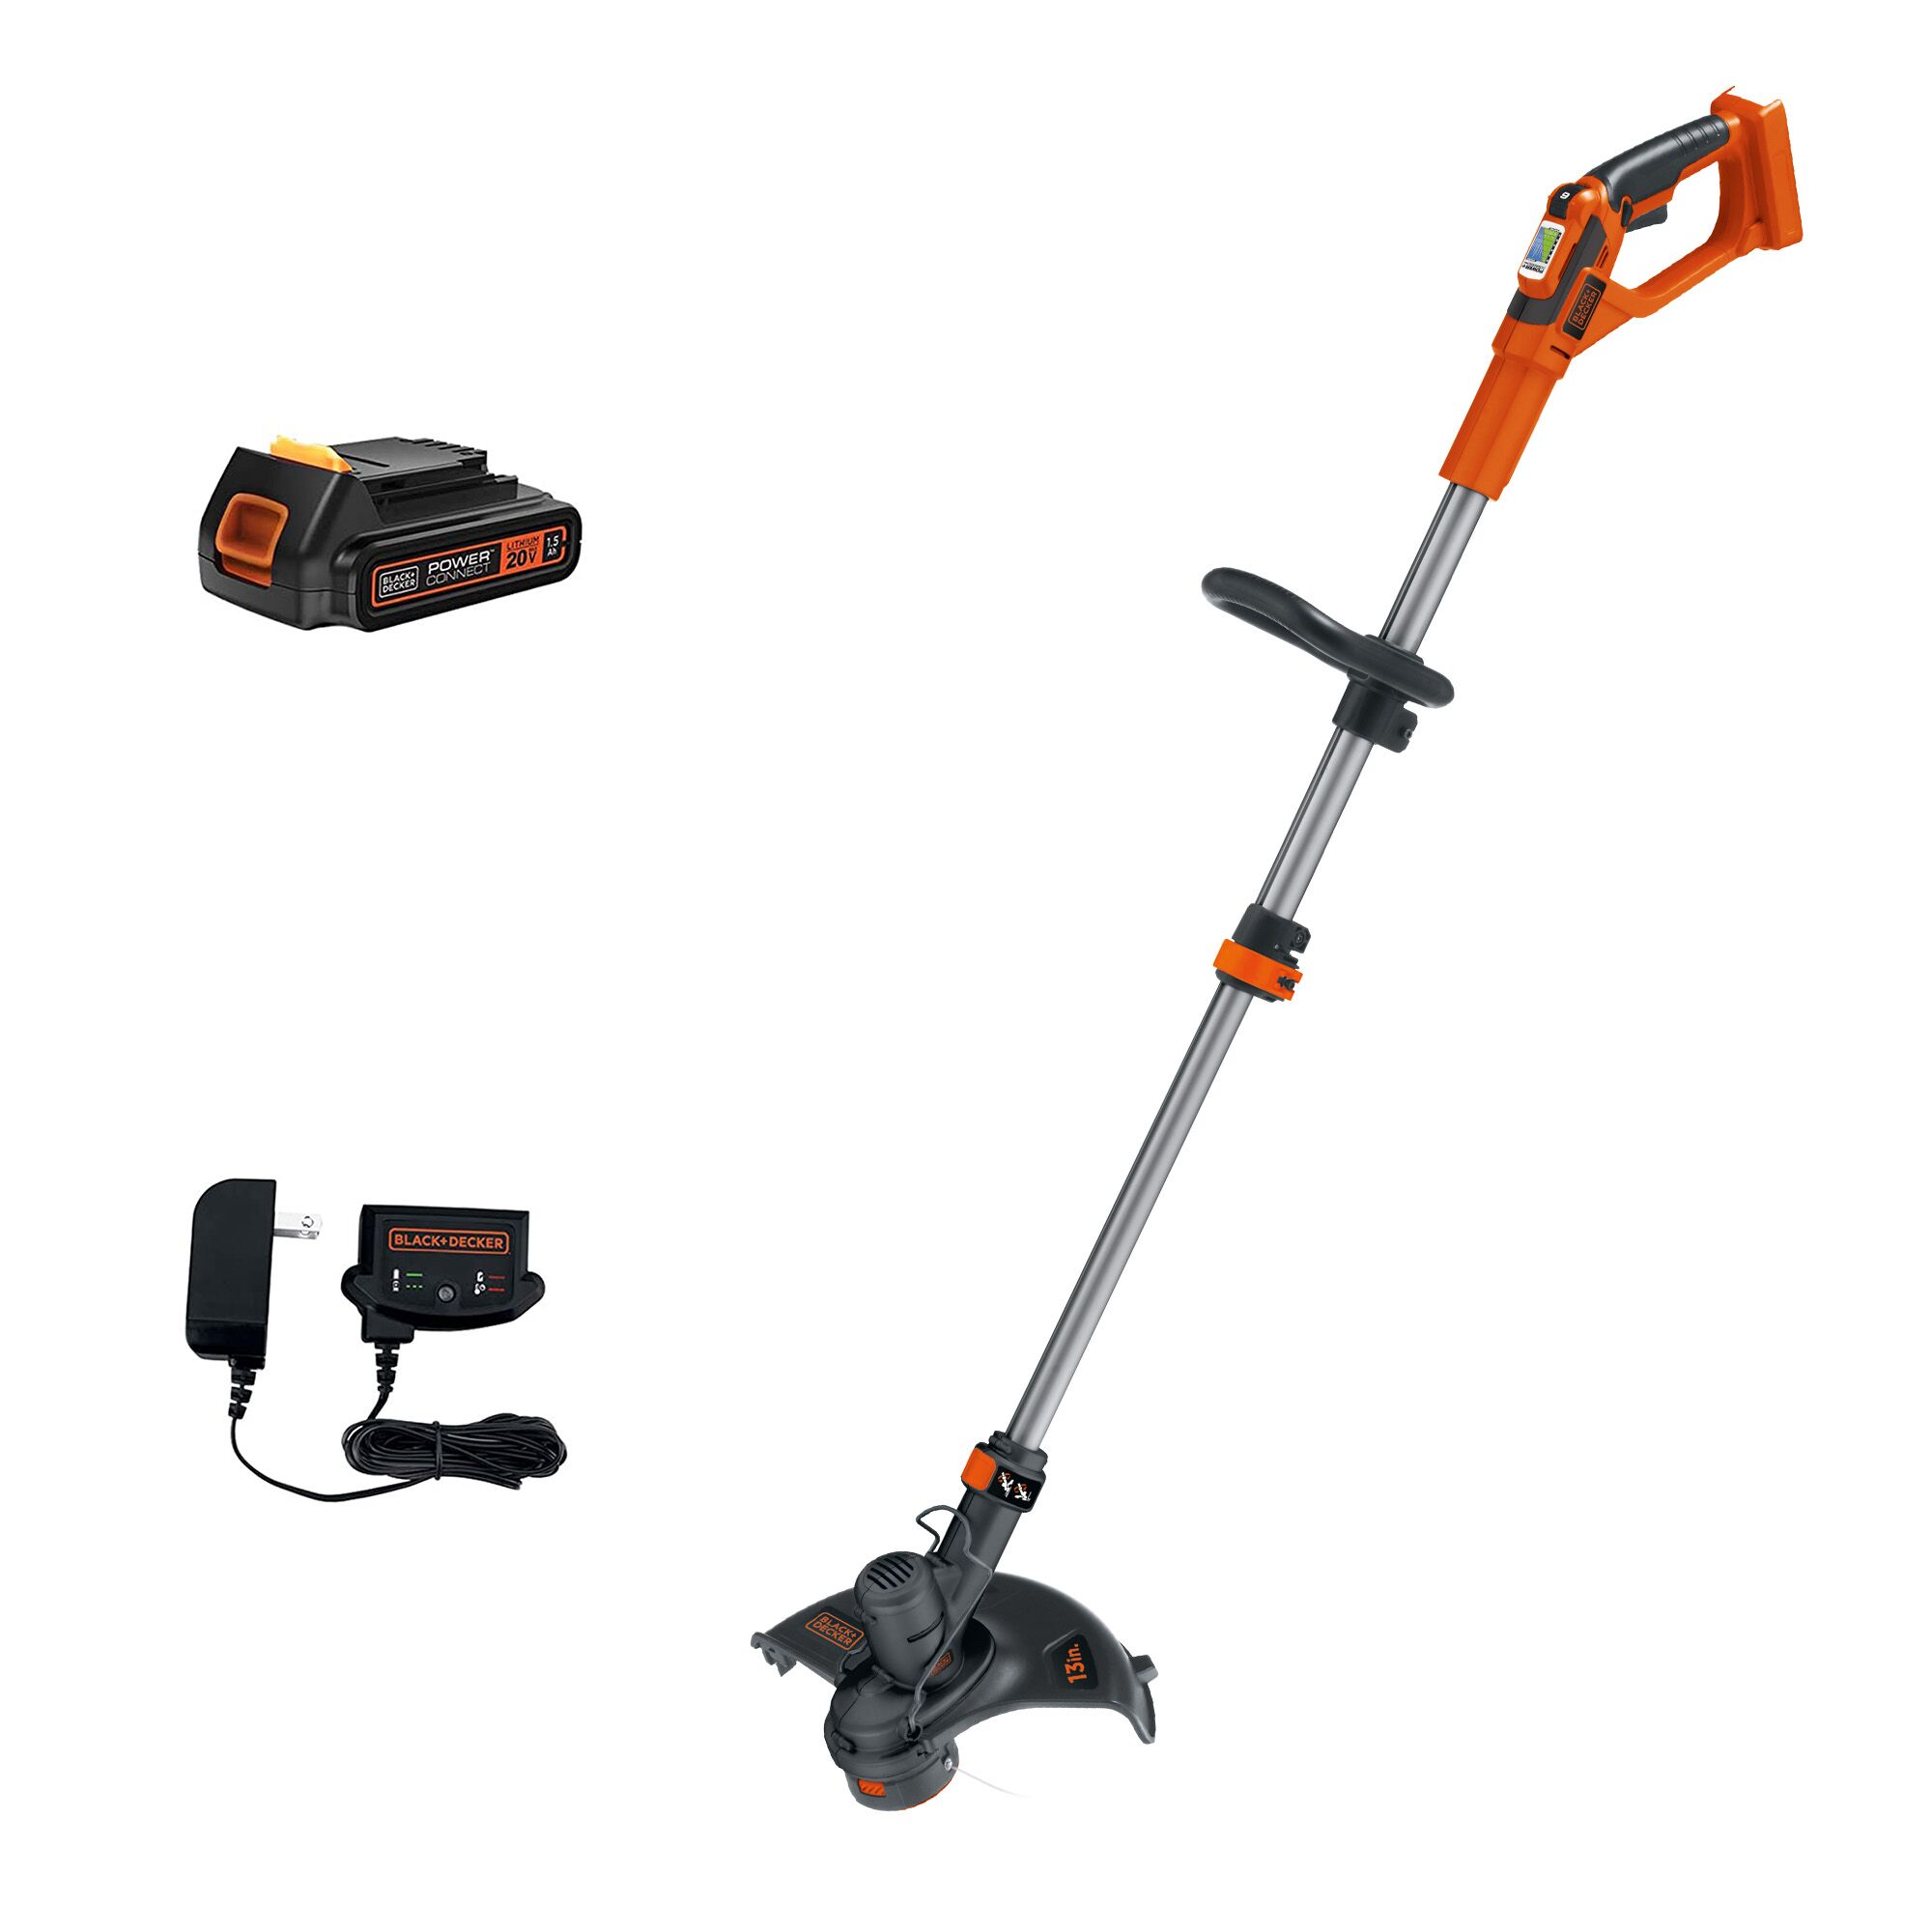 40 Volt Max String Trimmer with battery and charger.